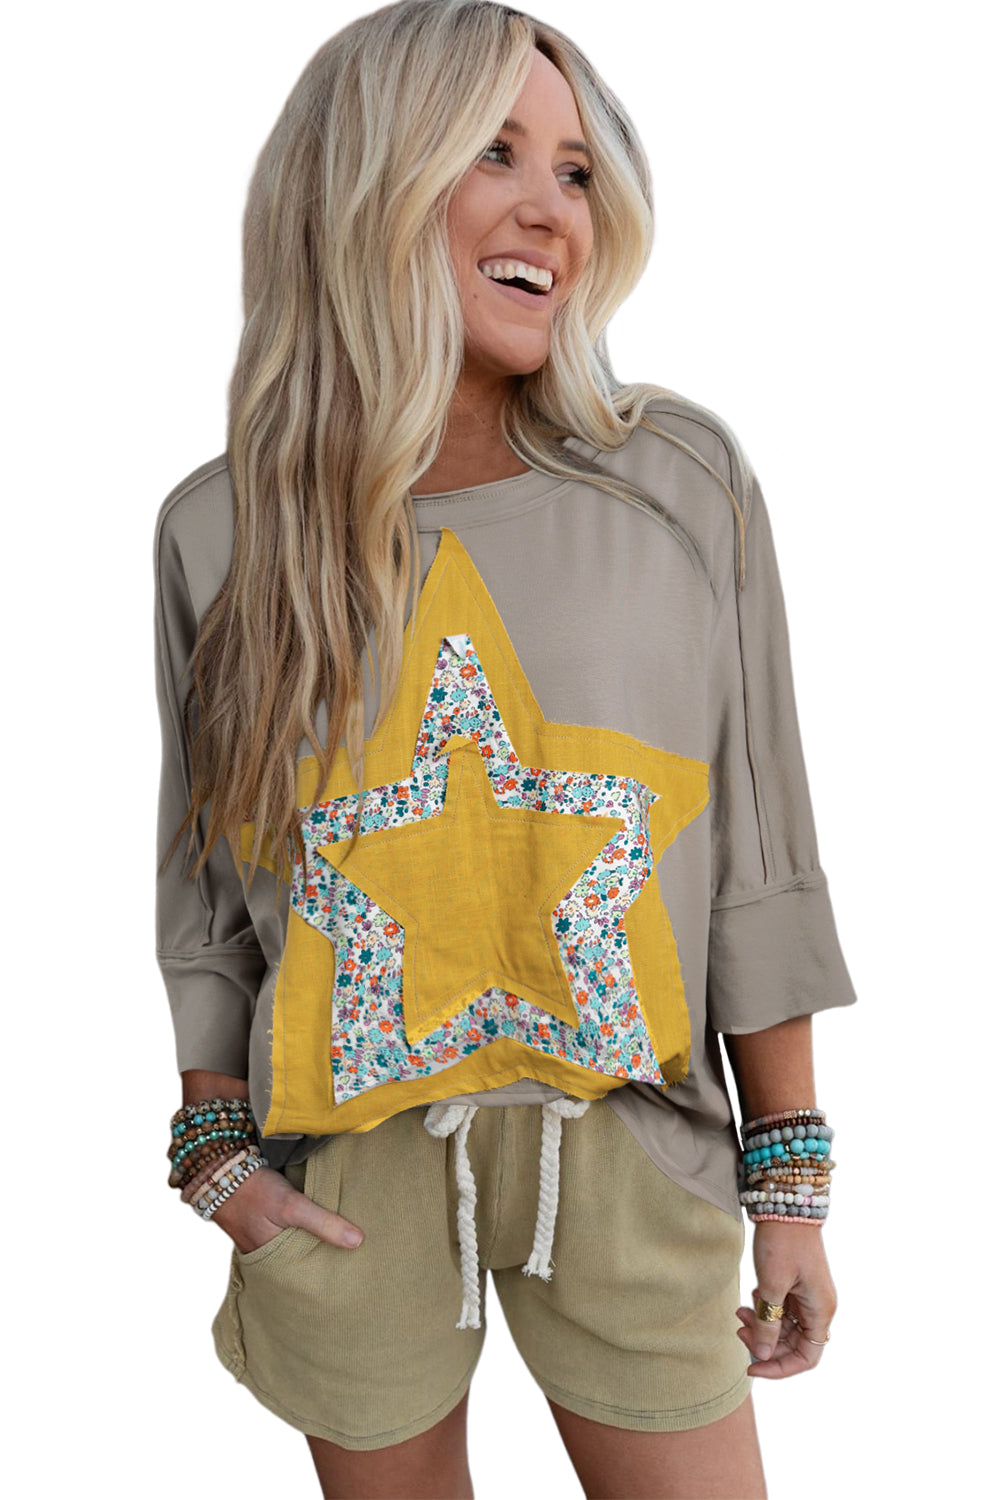 Rose Tan Floral Star Patched Exposed Seam Mineral Wash Top